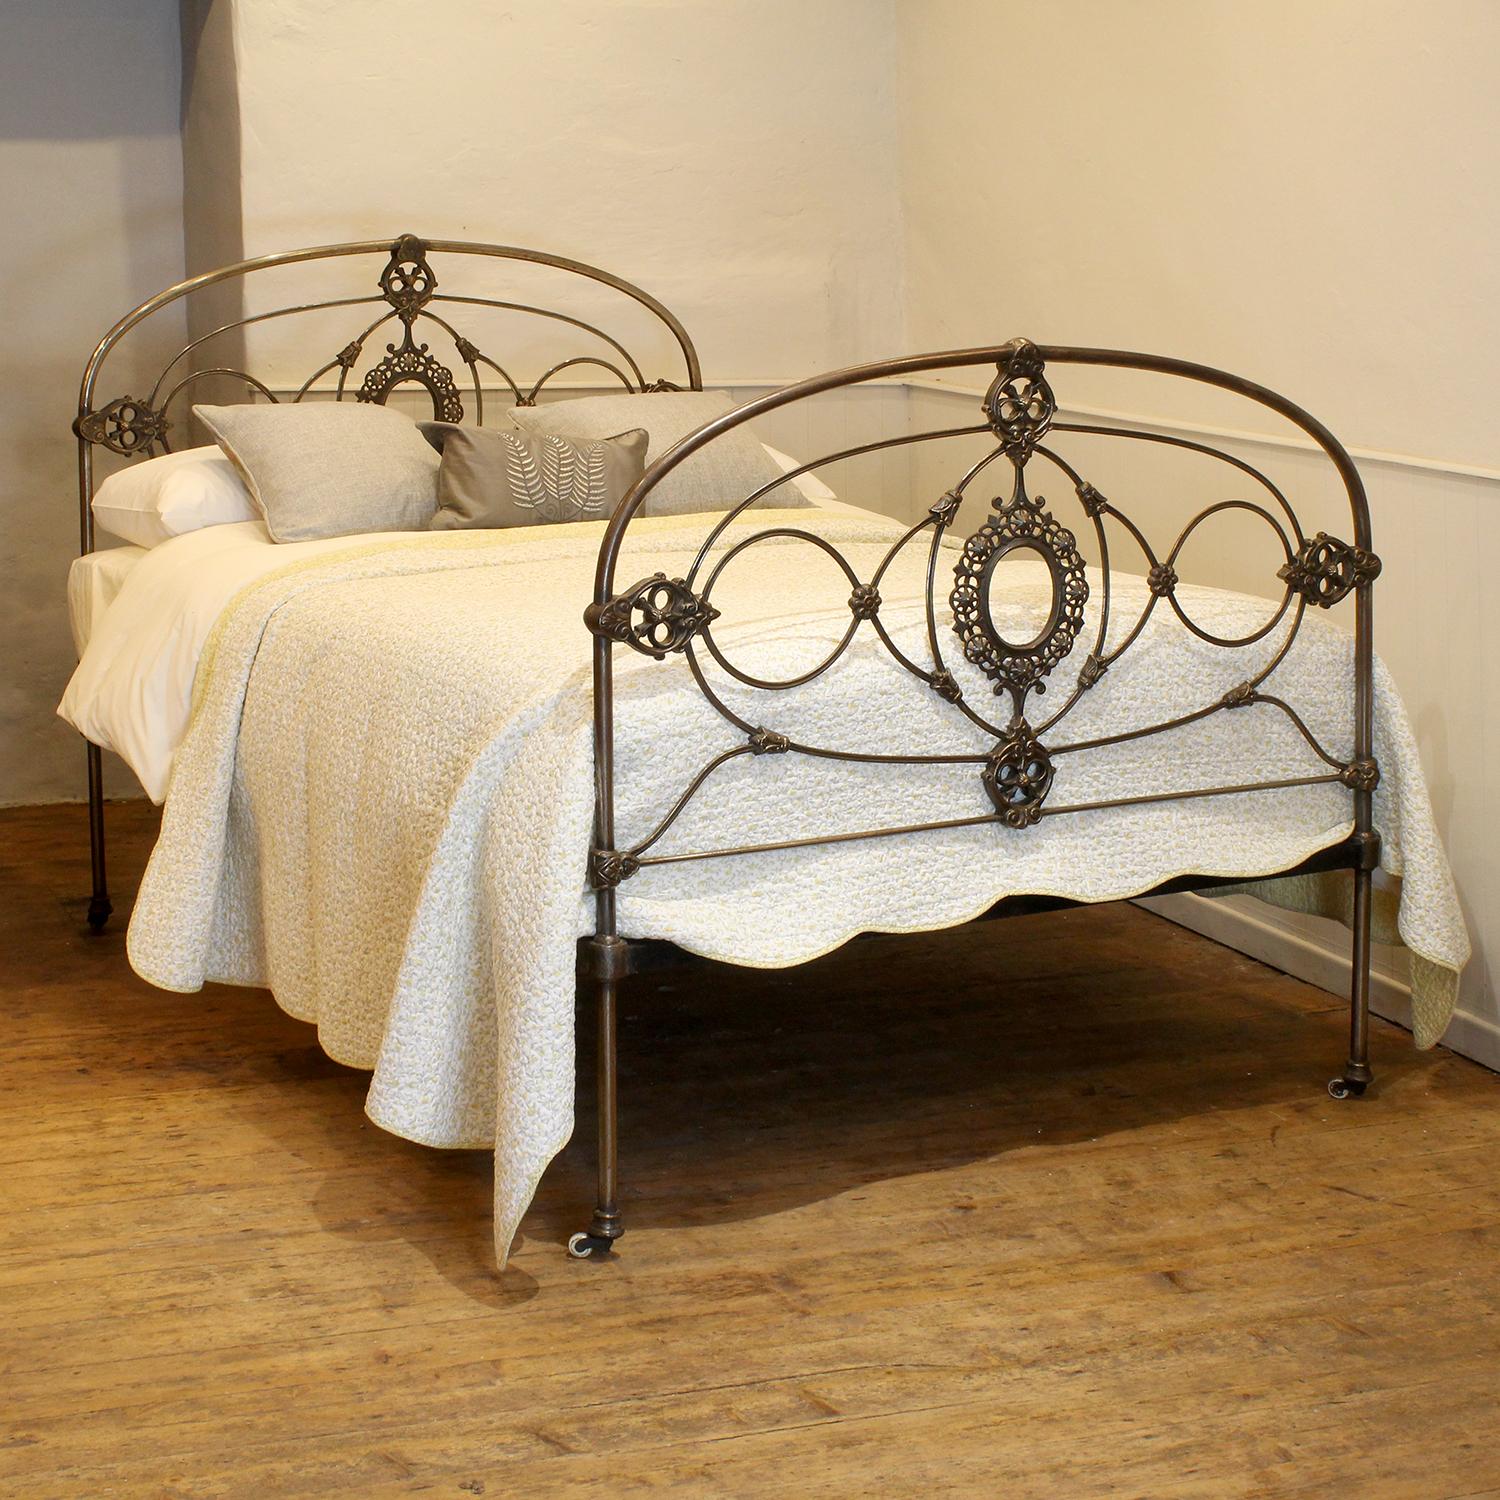 A fabulous double bed with arch design and ornate castings in polished cast iron and steel. This superb piece is one of the finest examples of decorative ironwork made at the height of the Victorian era. It was originally manufactured in one of the